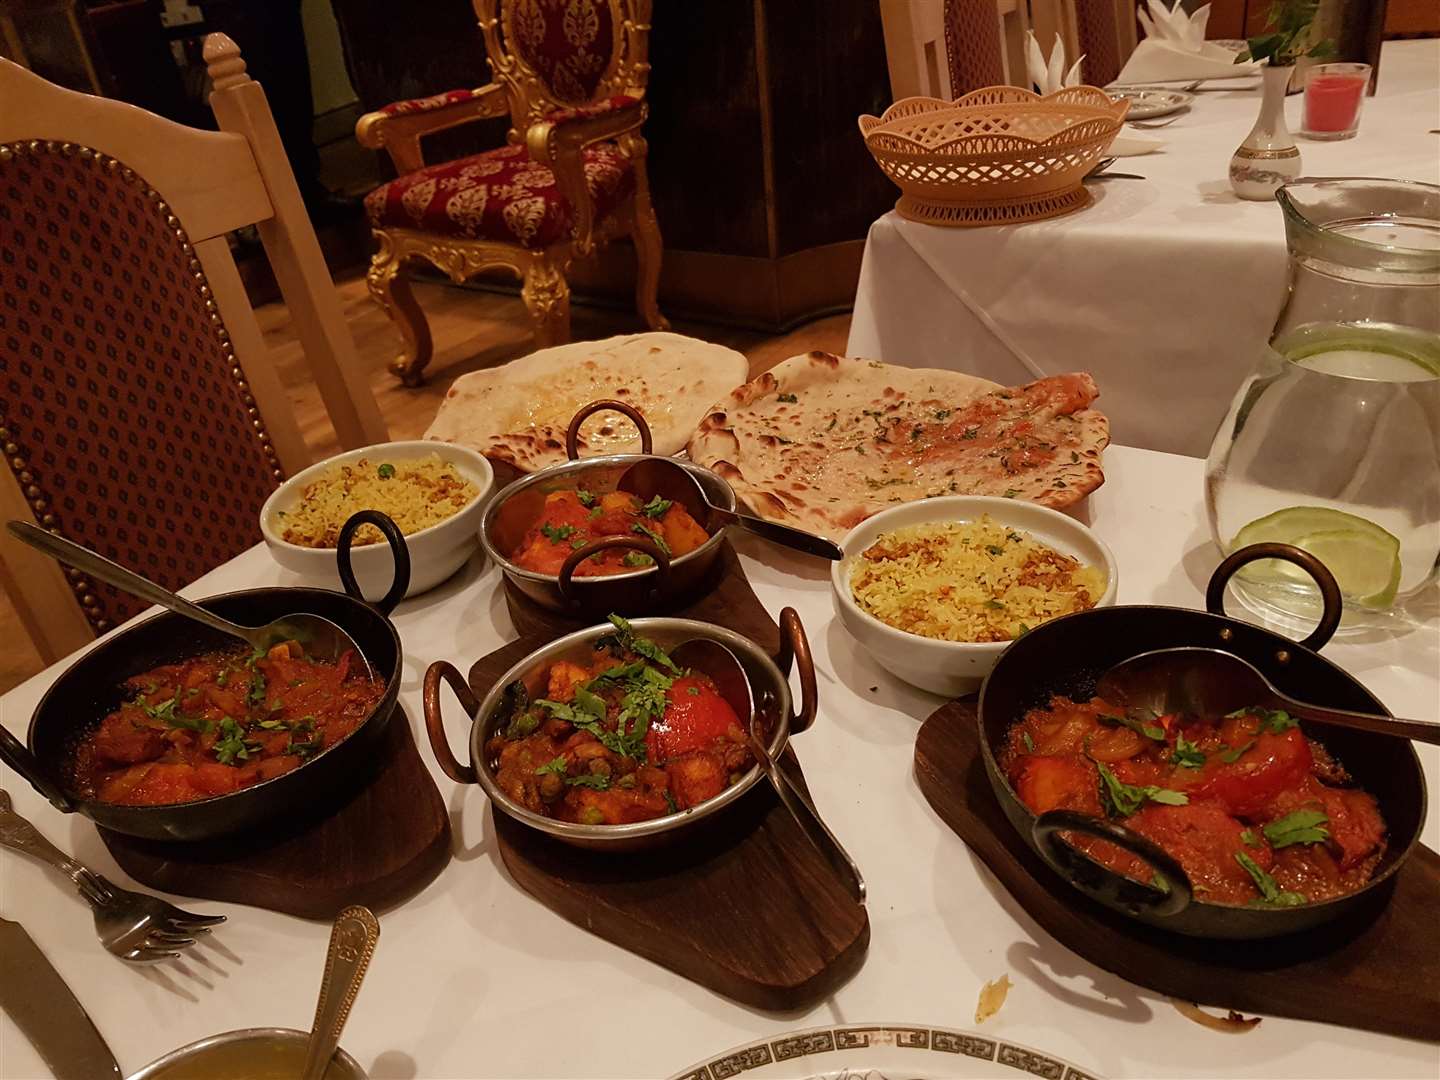 What is your favourite curry house? You can nominate your top choice now